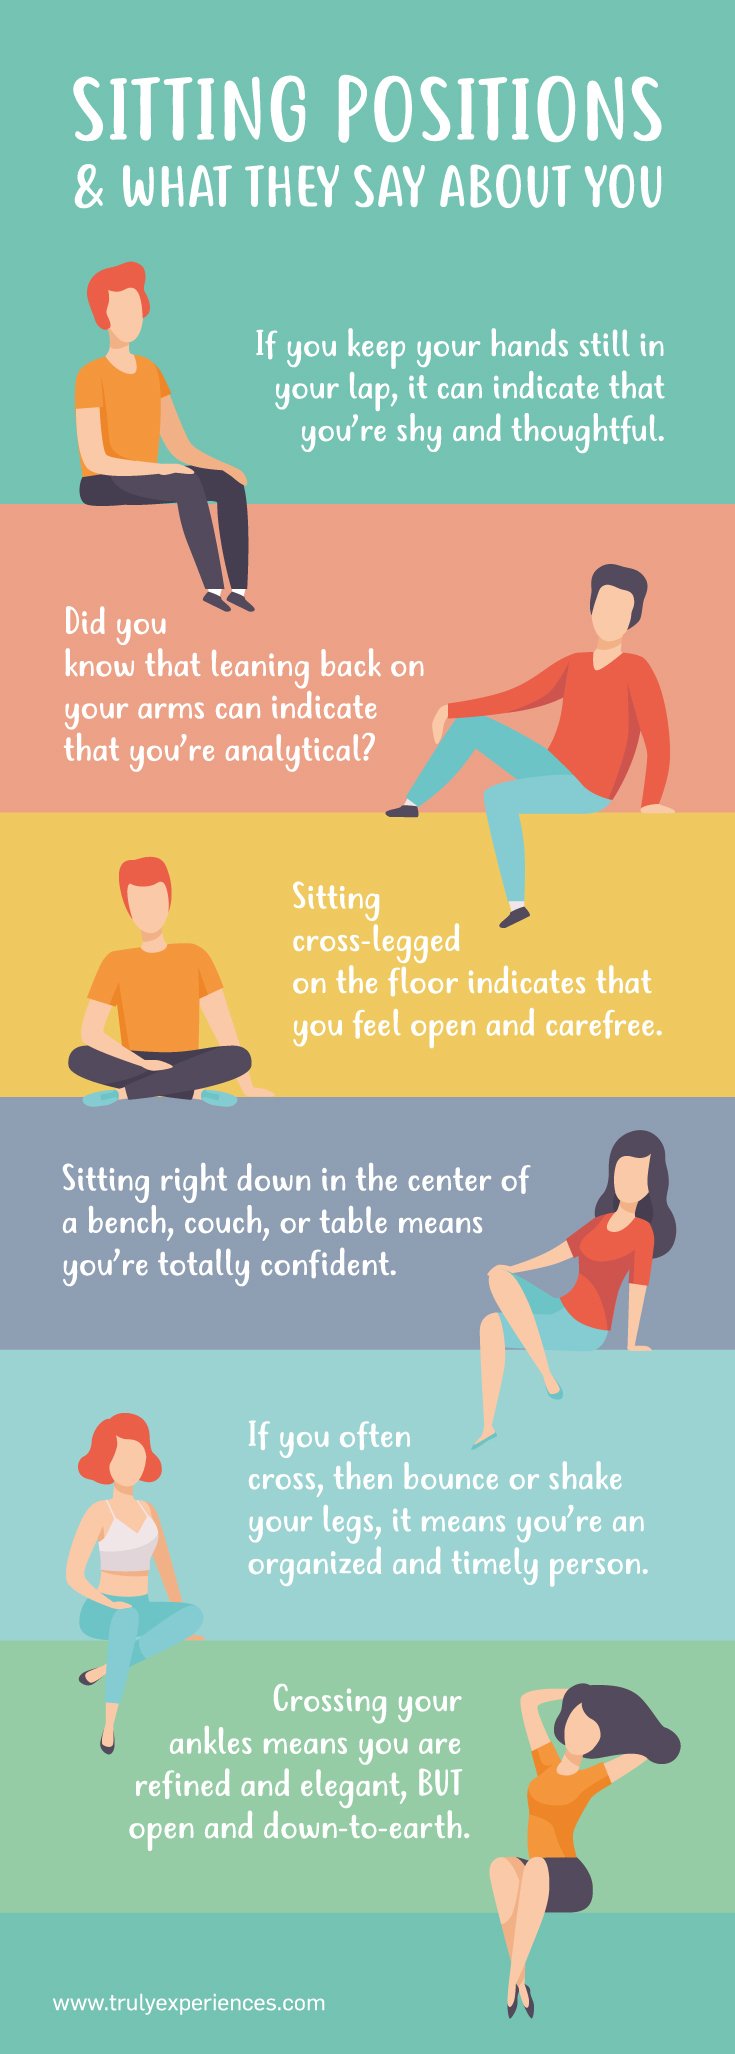 Sitting positions infographic